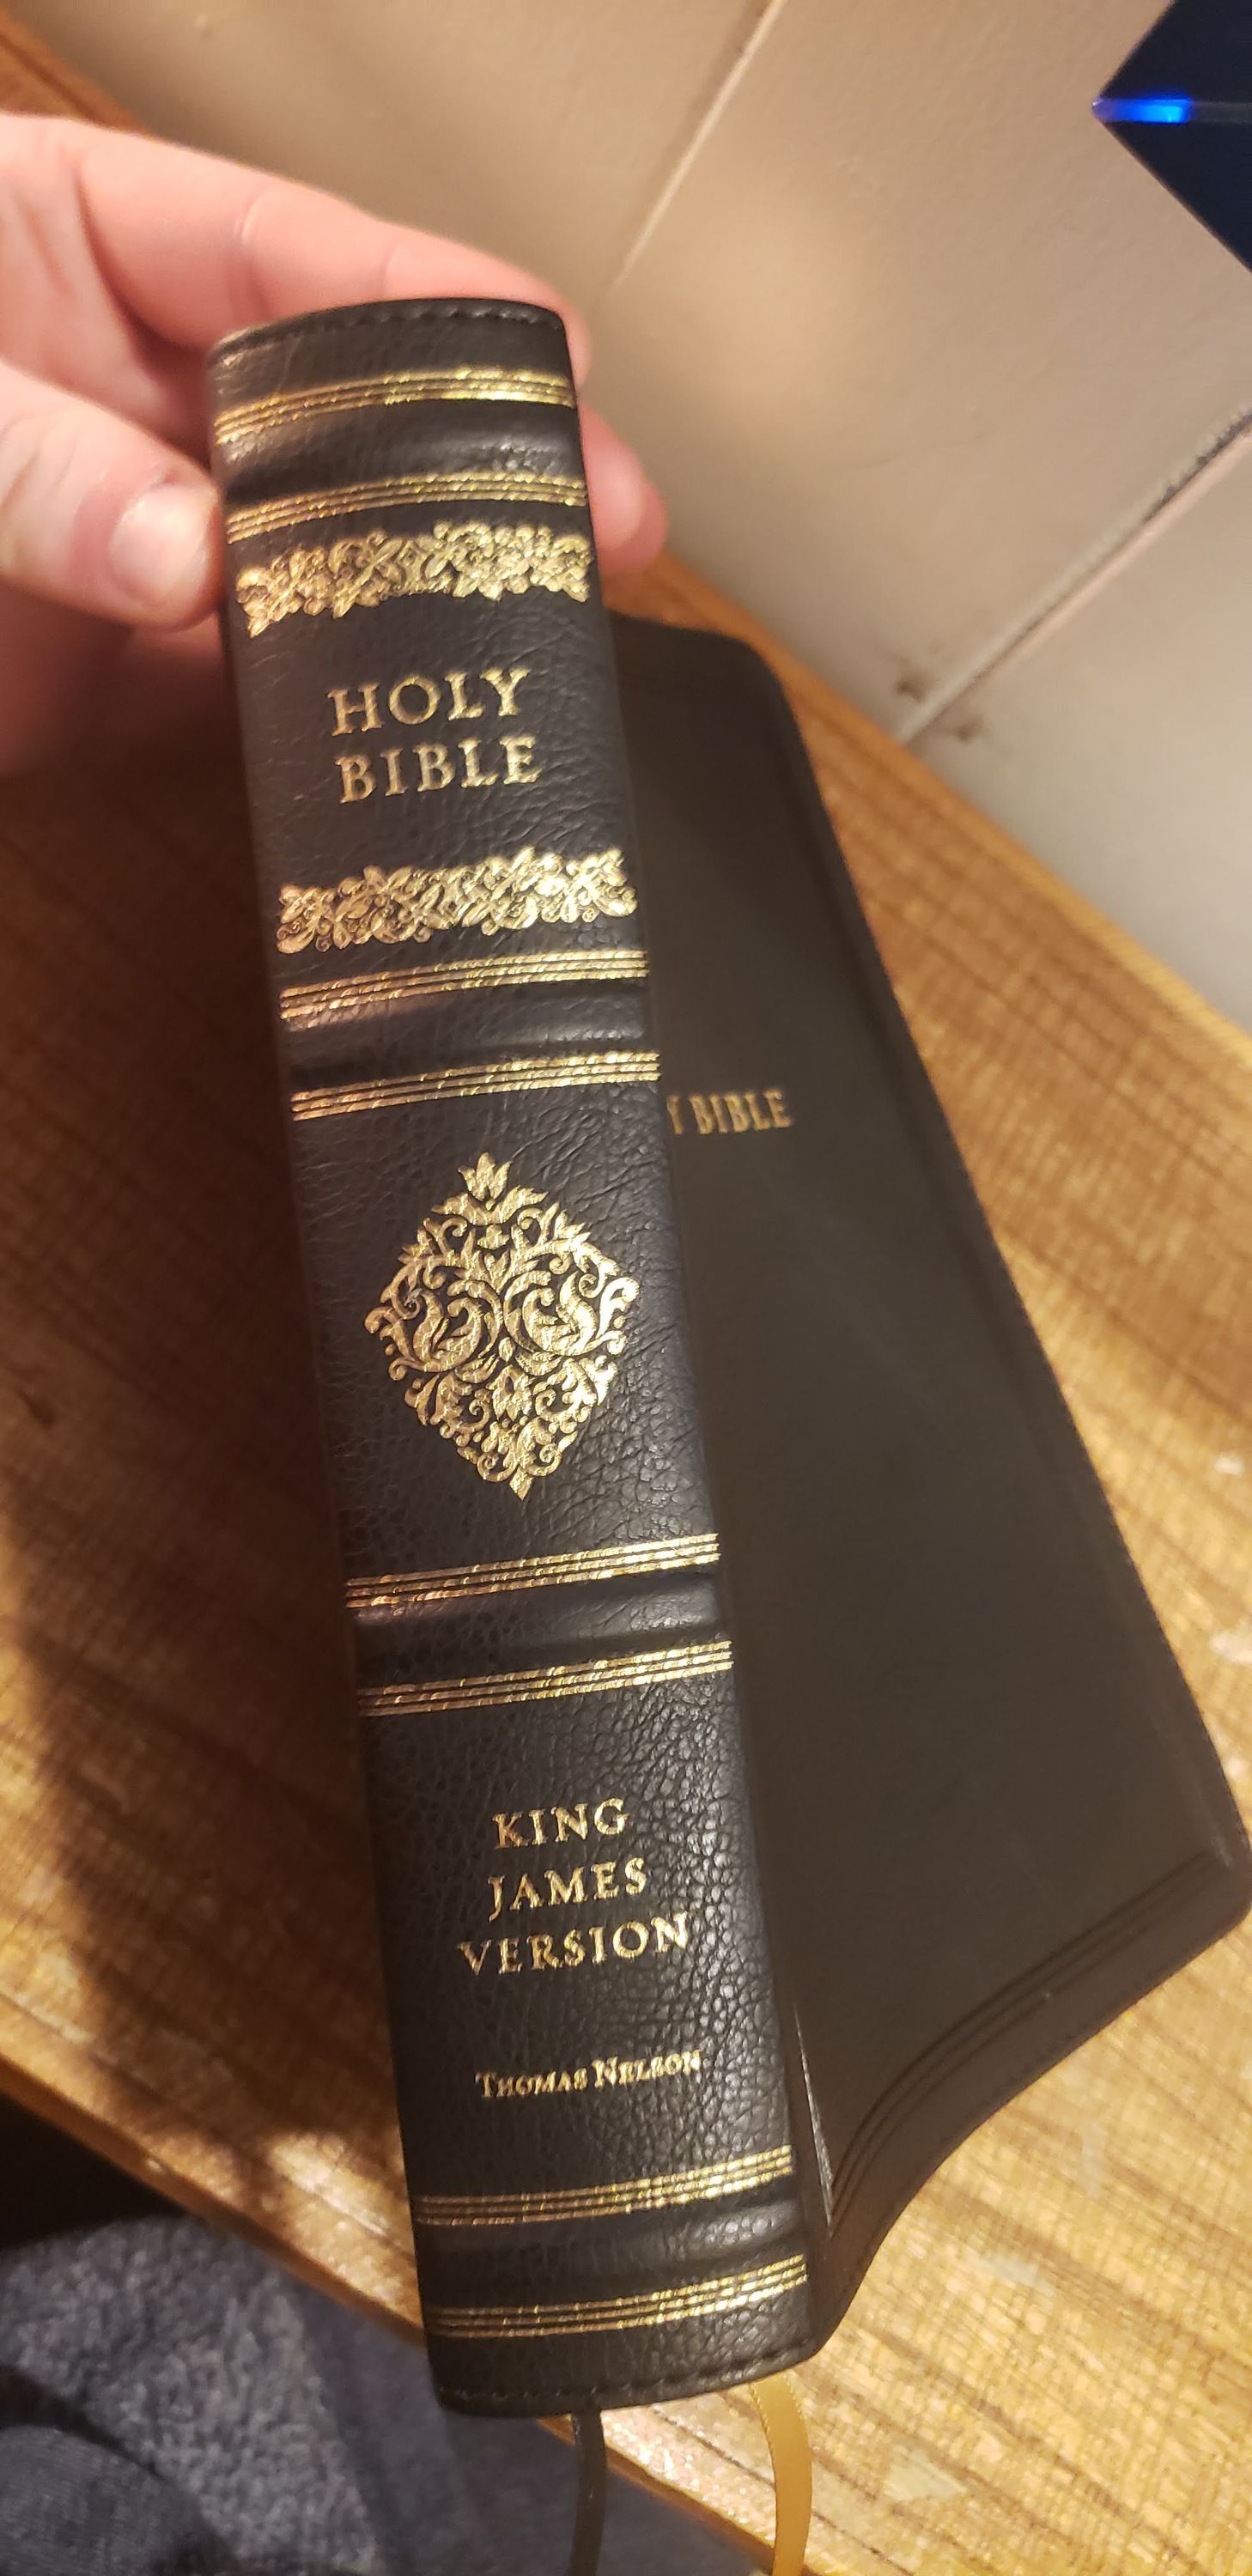 Photo of the Bible’s spine.